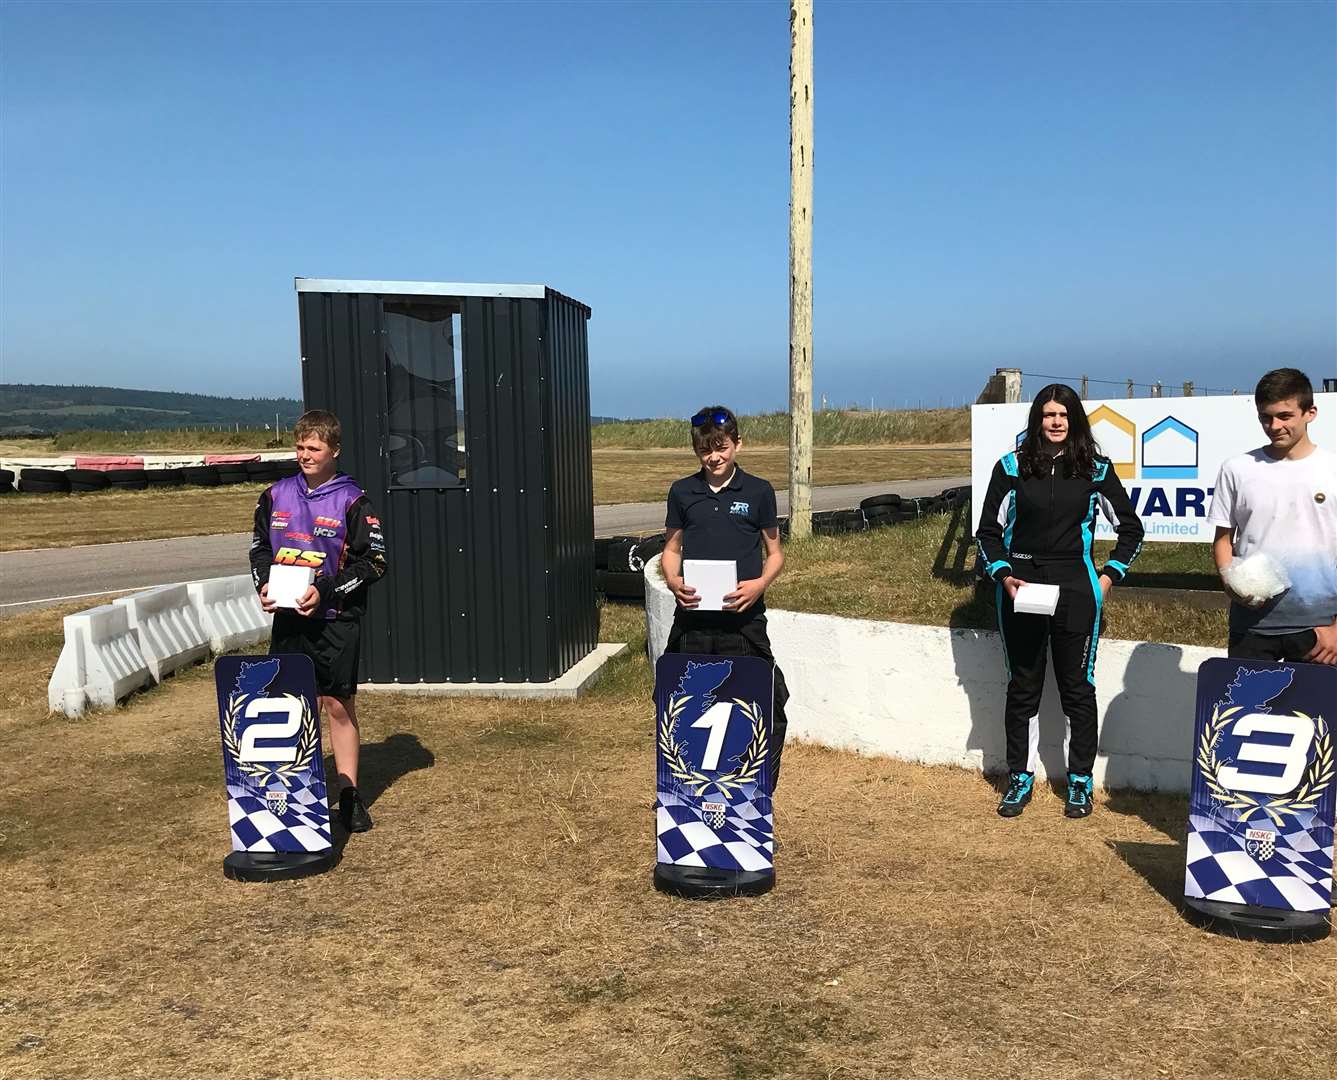 Junior Max winner Jack Ryan with the other leading competitors in his section at the Golspie Open kart racing event.